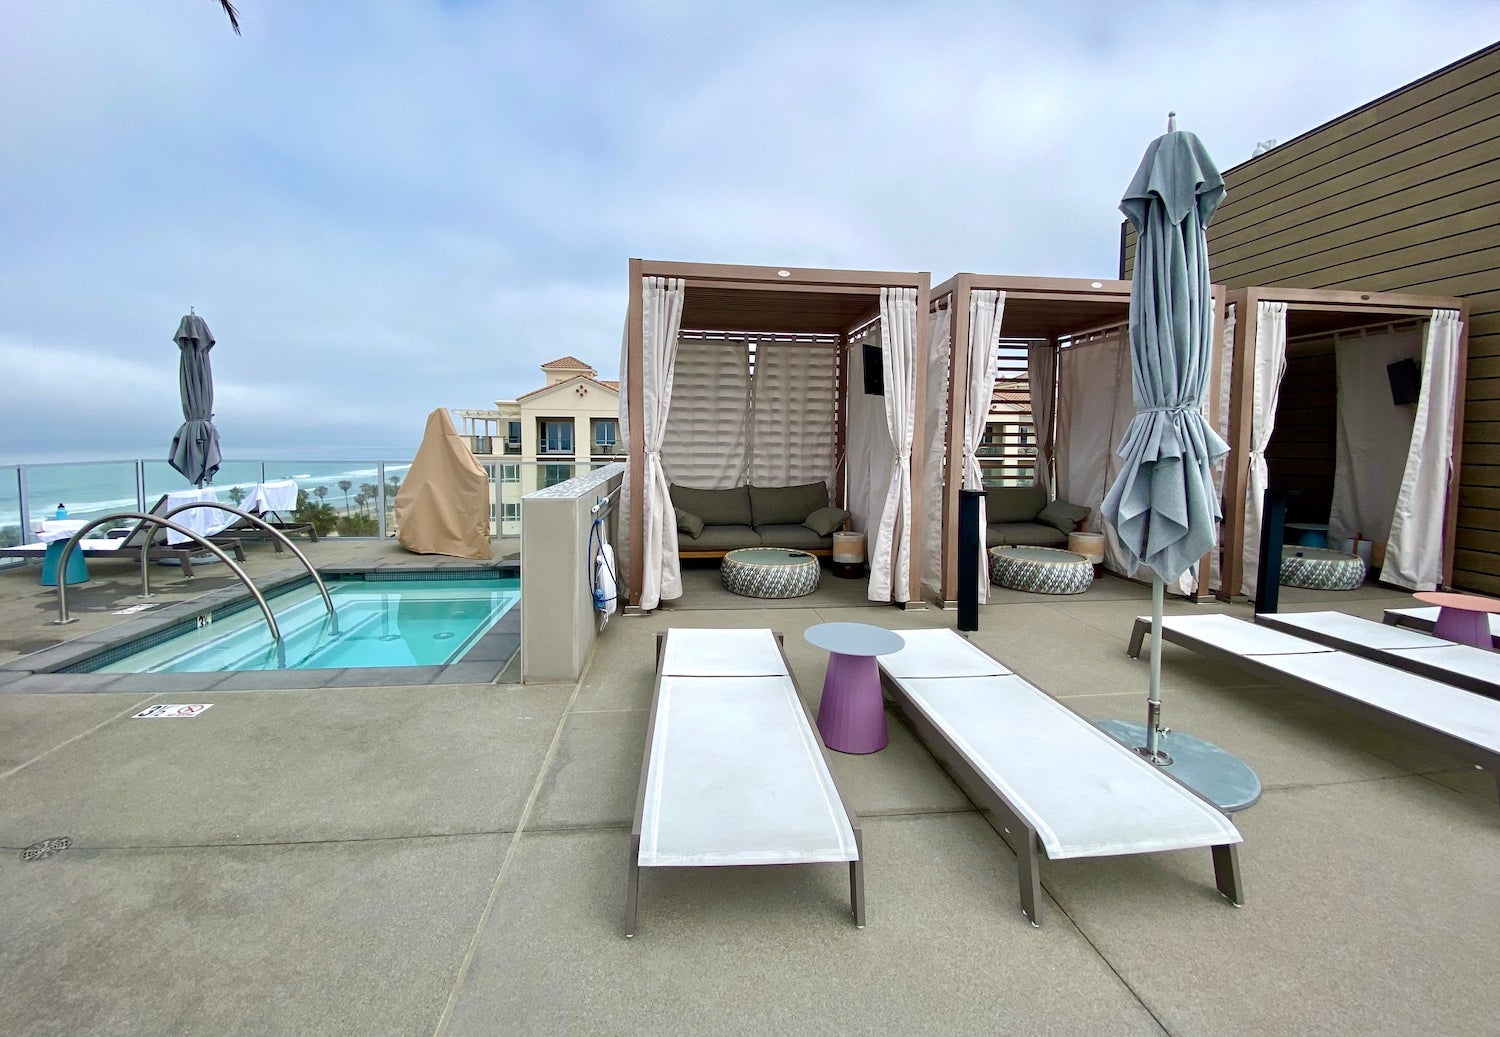 Jacuzzi and private cabanas